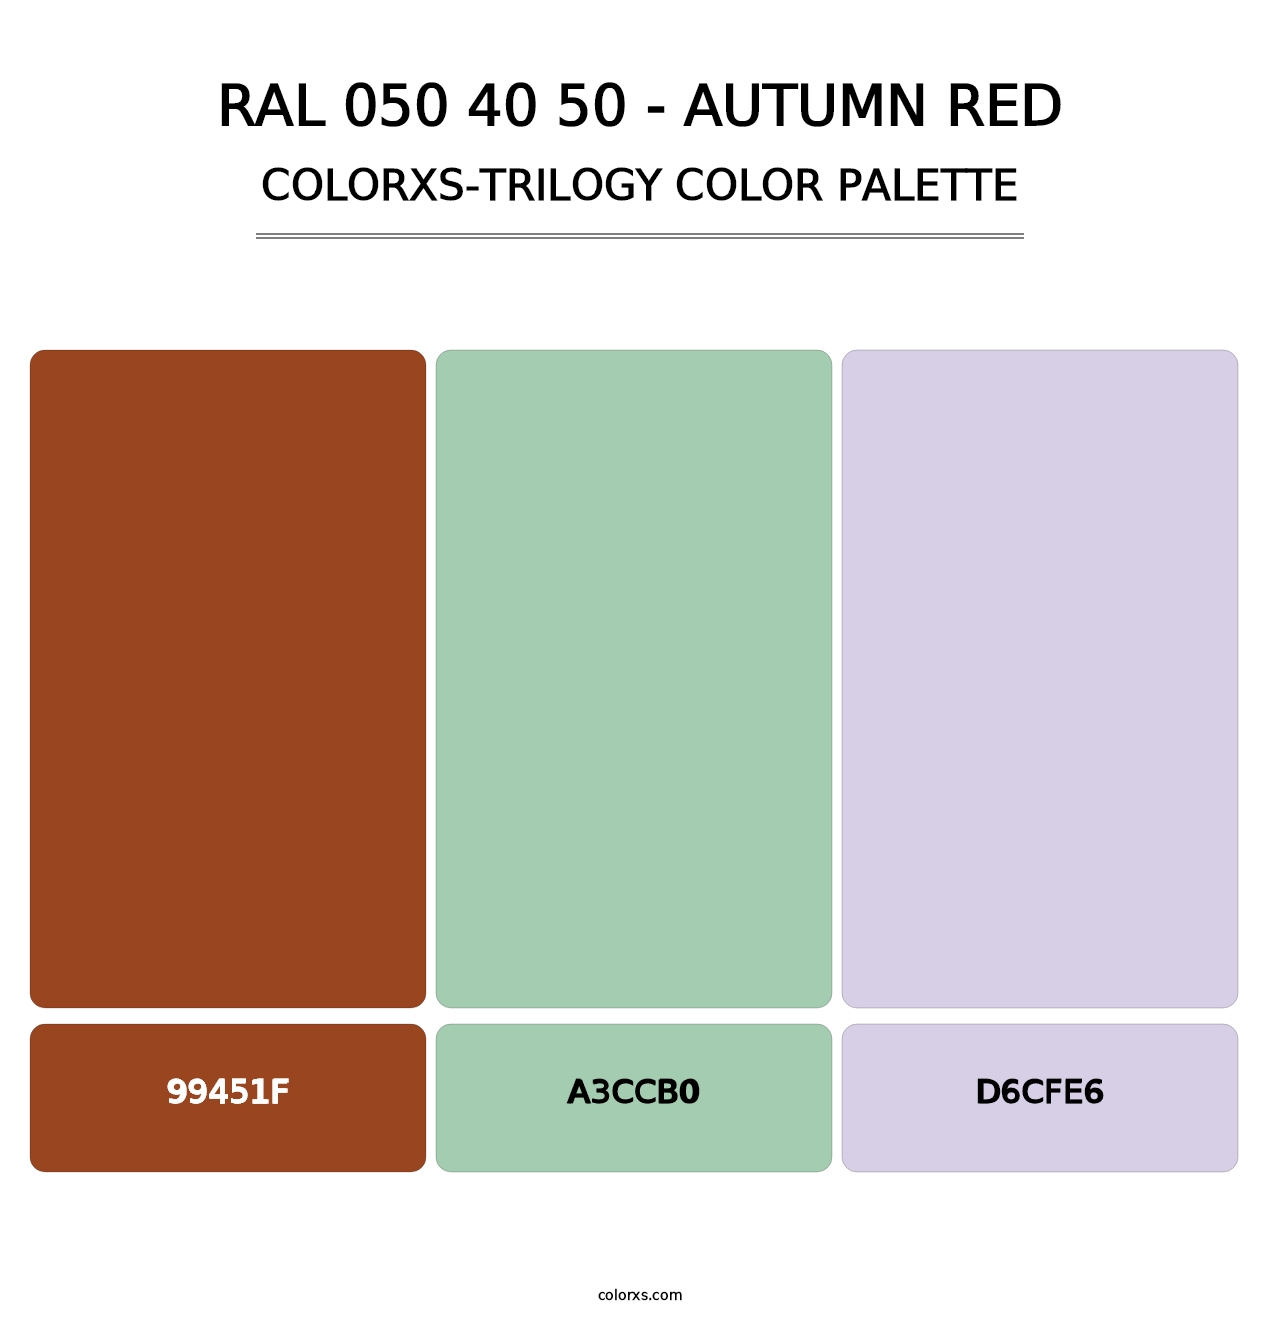 RAL 050 40 50 - Autumn Red - Colorxs Trilogy Palette